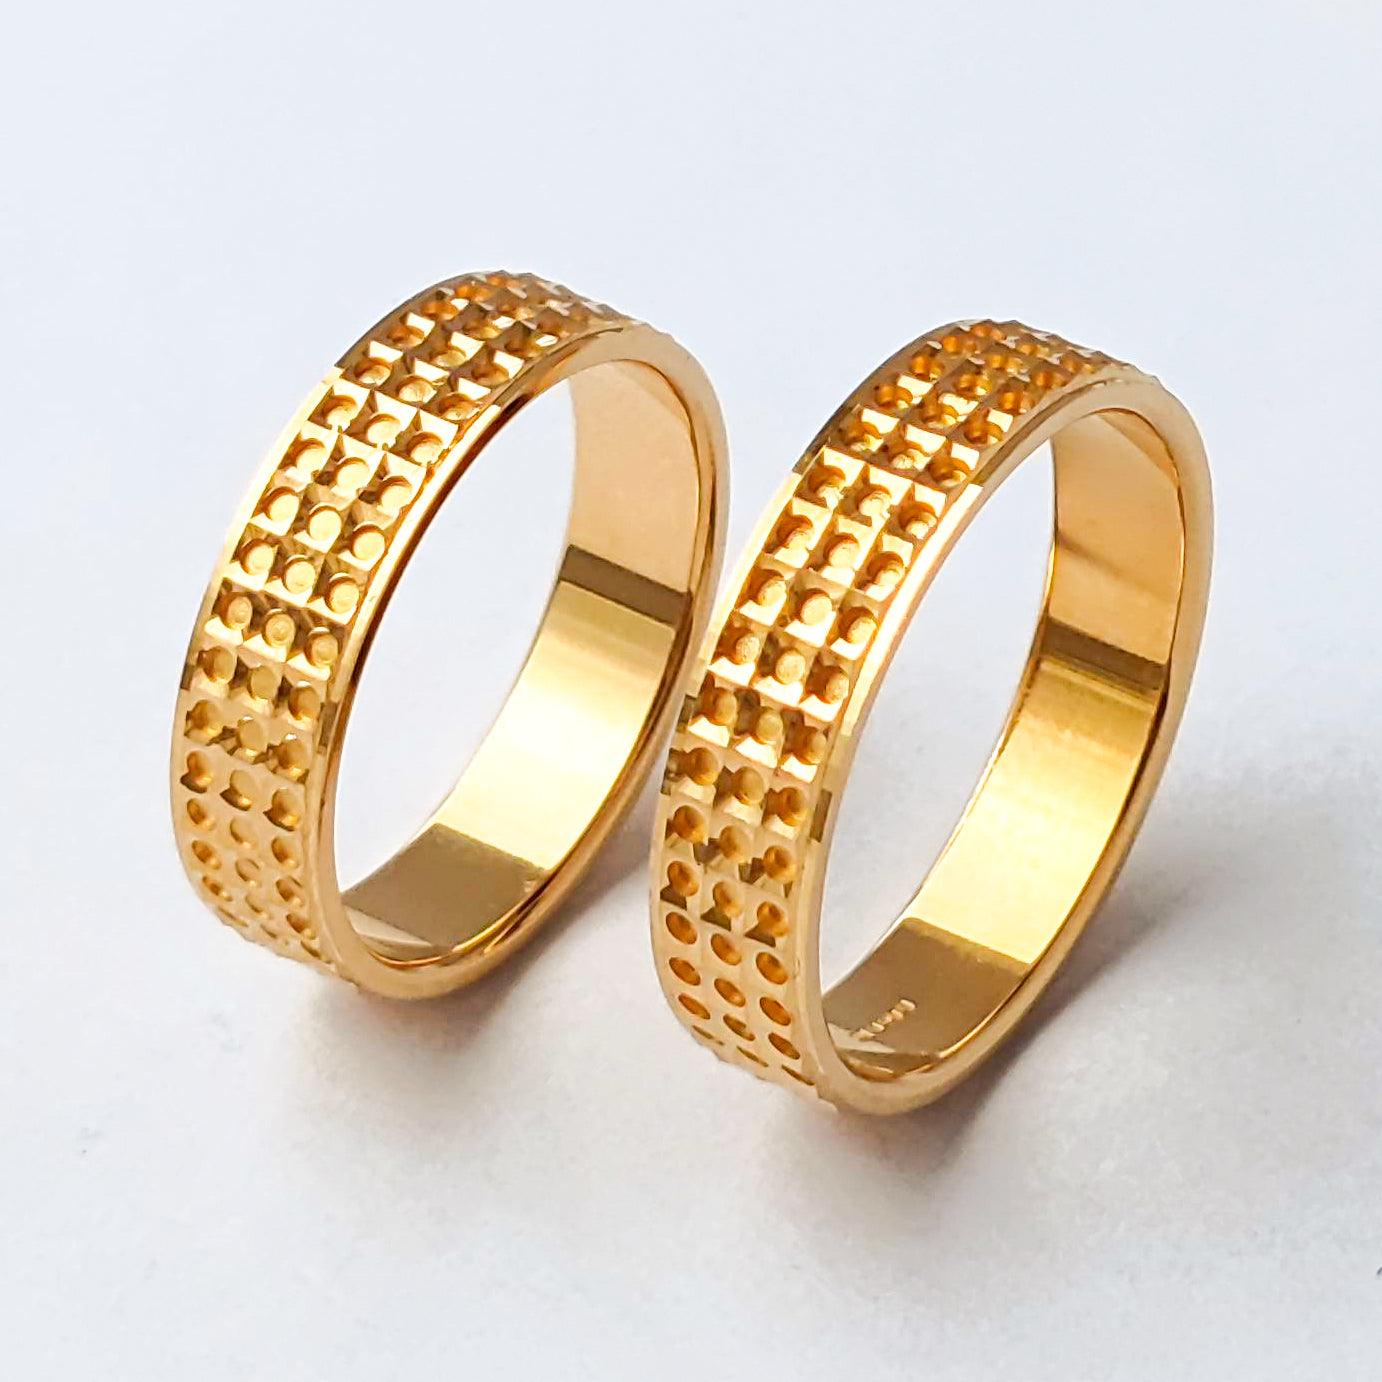 22ct Gold Wedding Band with Pitted Finish LR/GR-8219 - Minar Jewellers